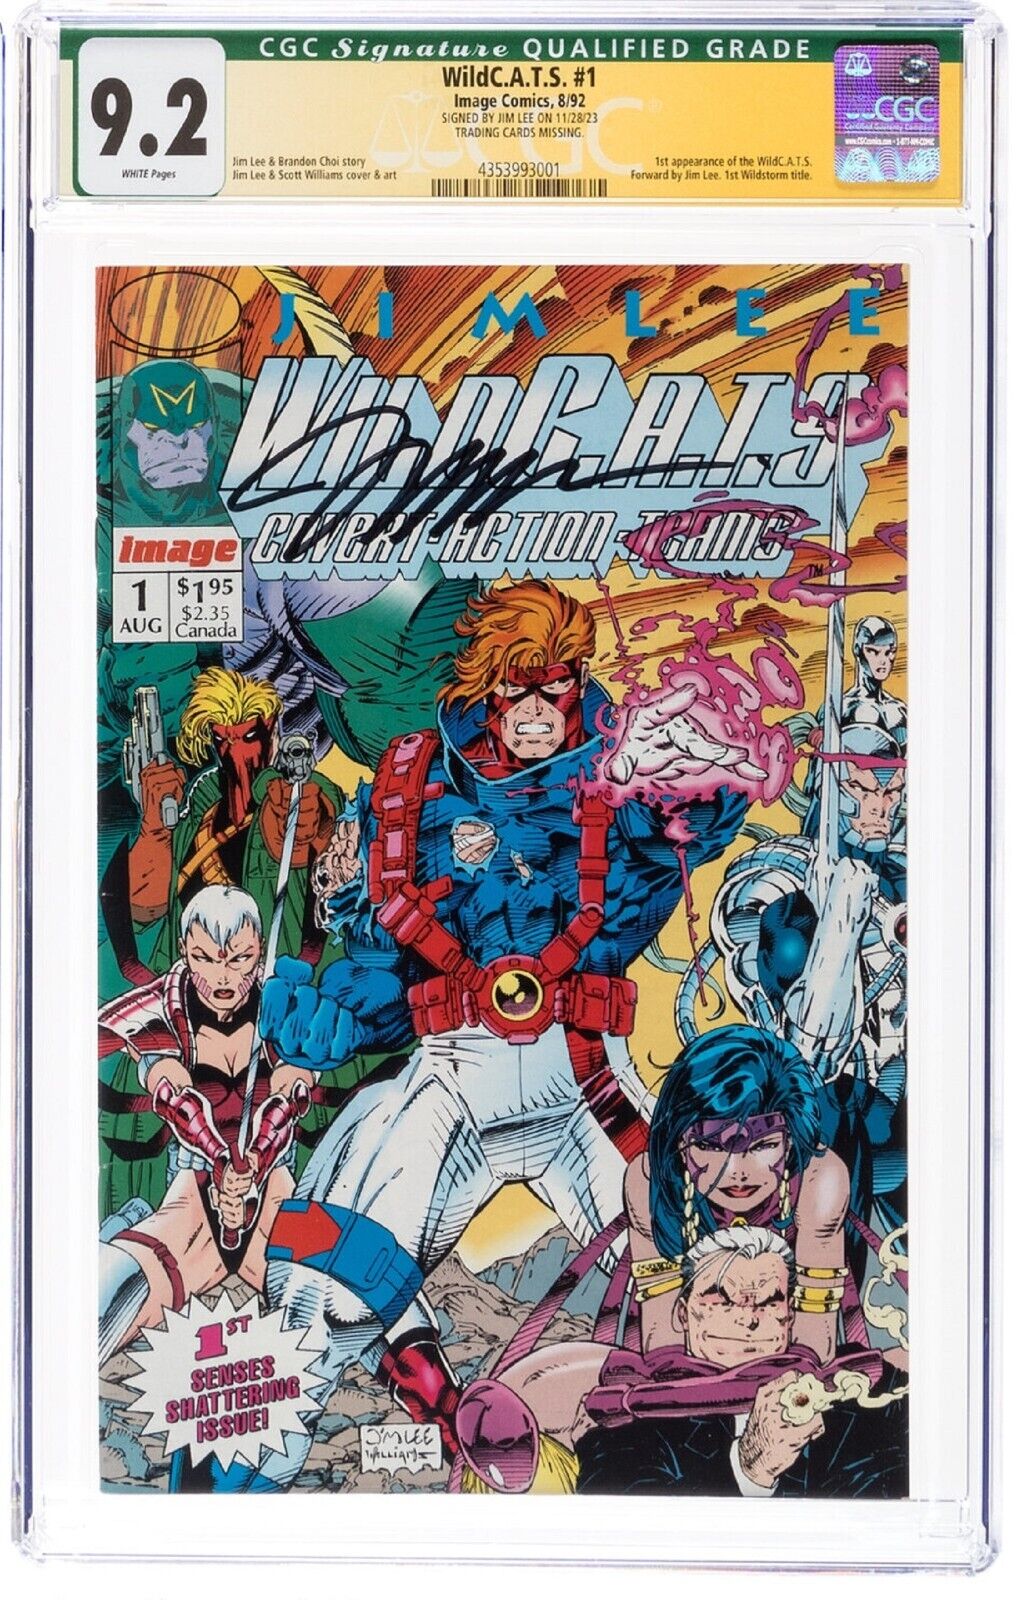 WILDCATS #1 Signed By Jim Lee 1993 Image Comics 1st app first appearance 9.2 CGC